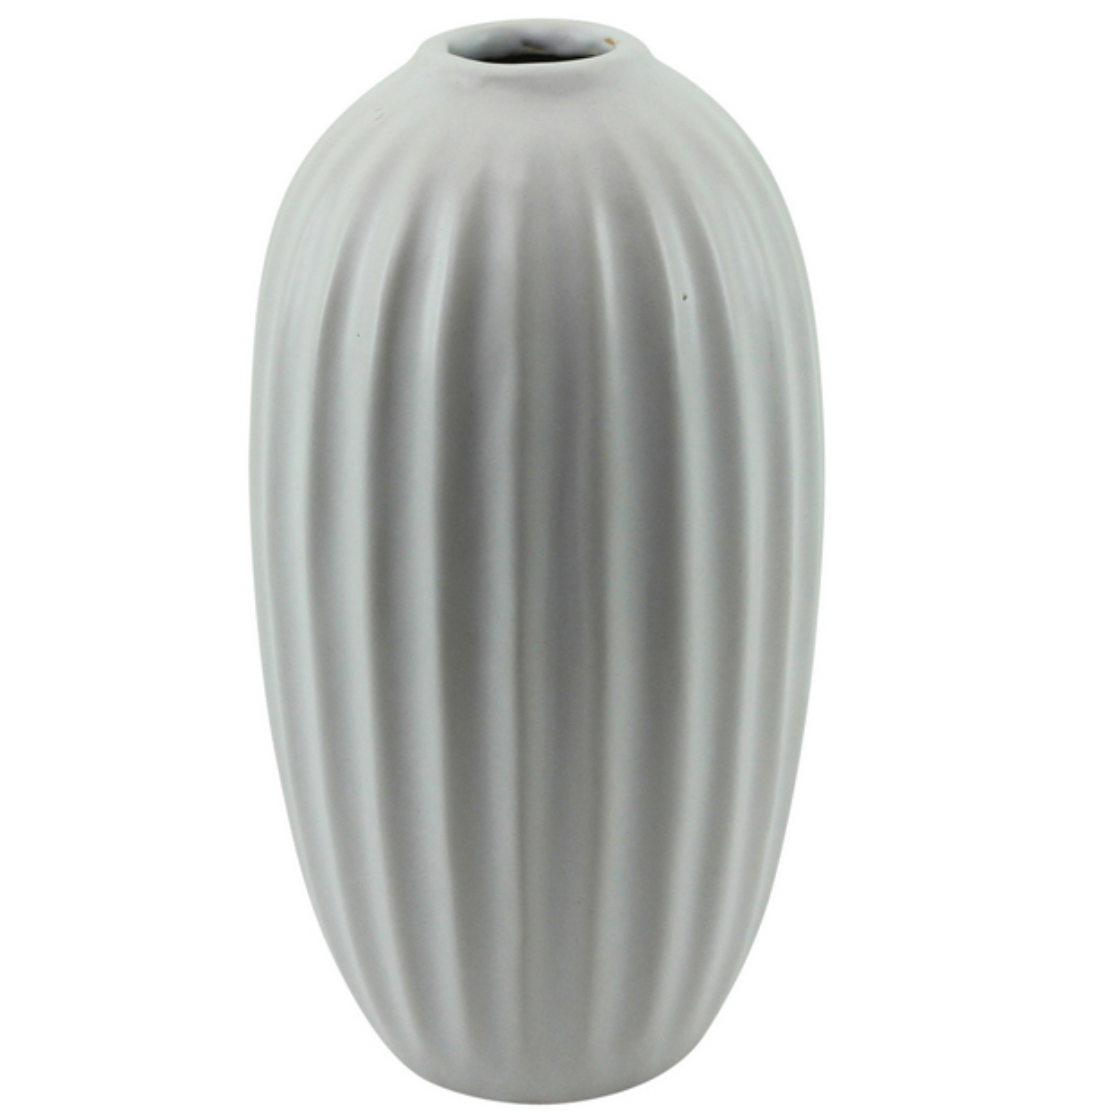 Grooved Bud White Vase - different sizes available - Daisy Grace Lifestyle